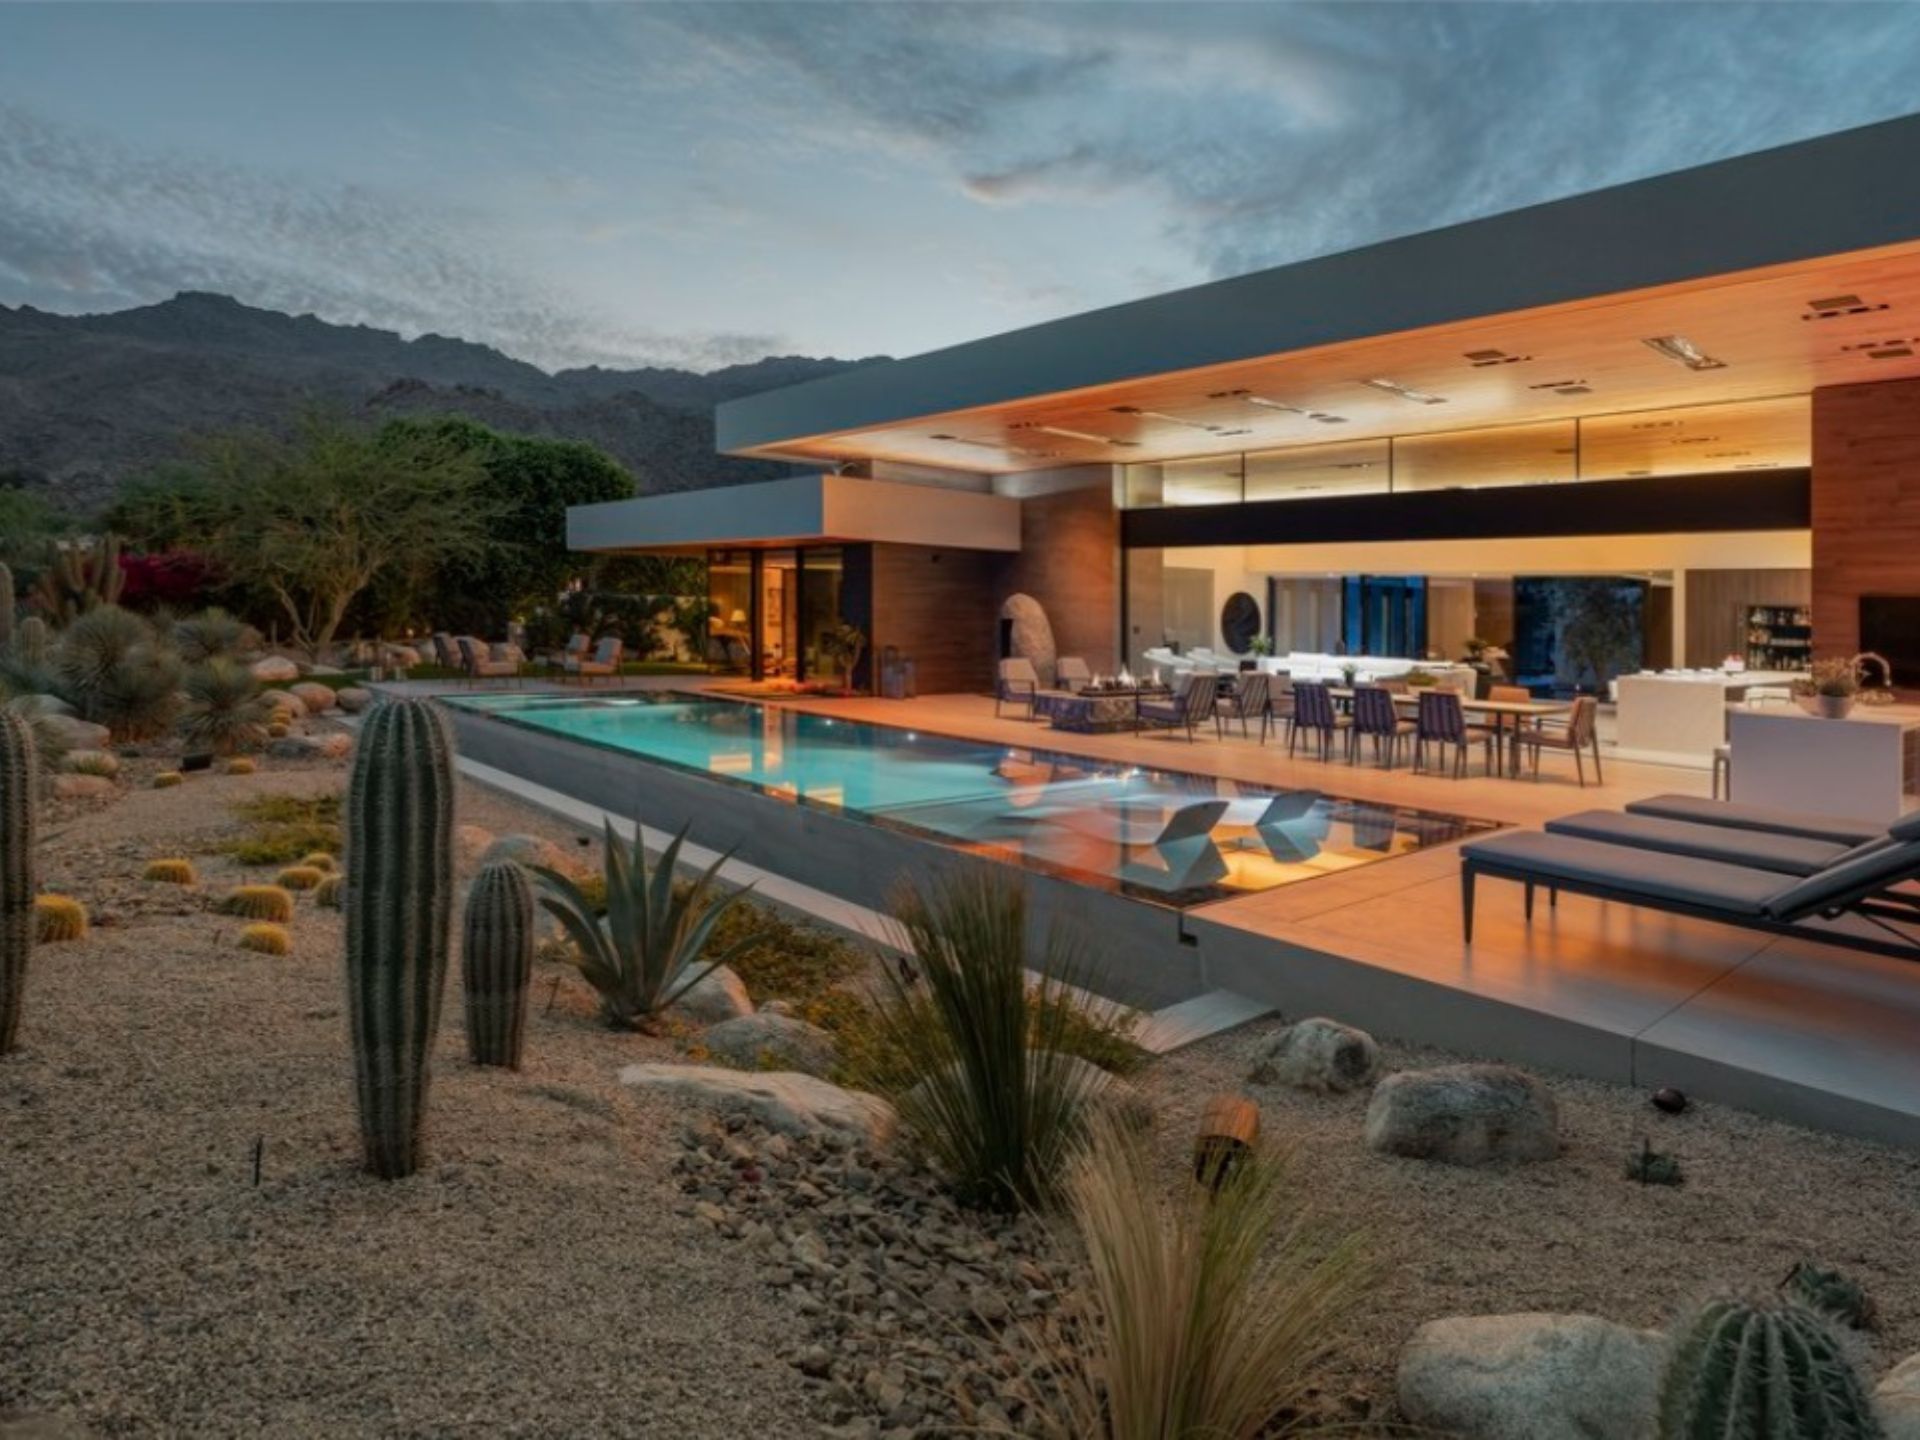 backyard of a modern house set in a desert, has a pool and a dining table